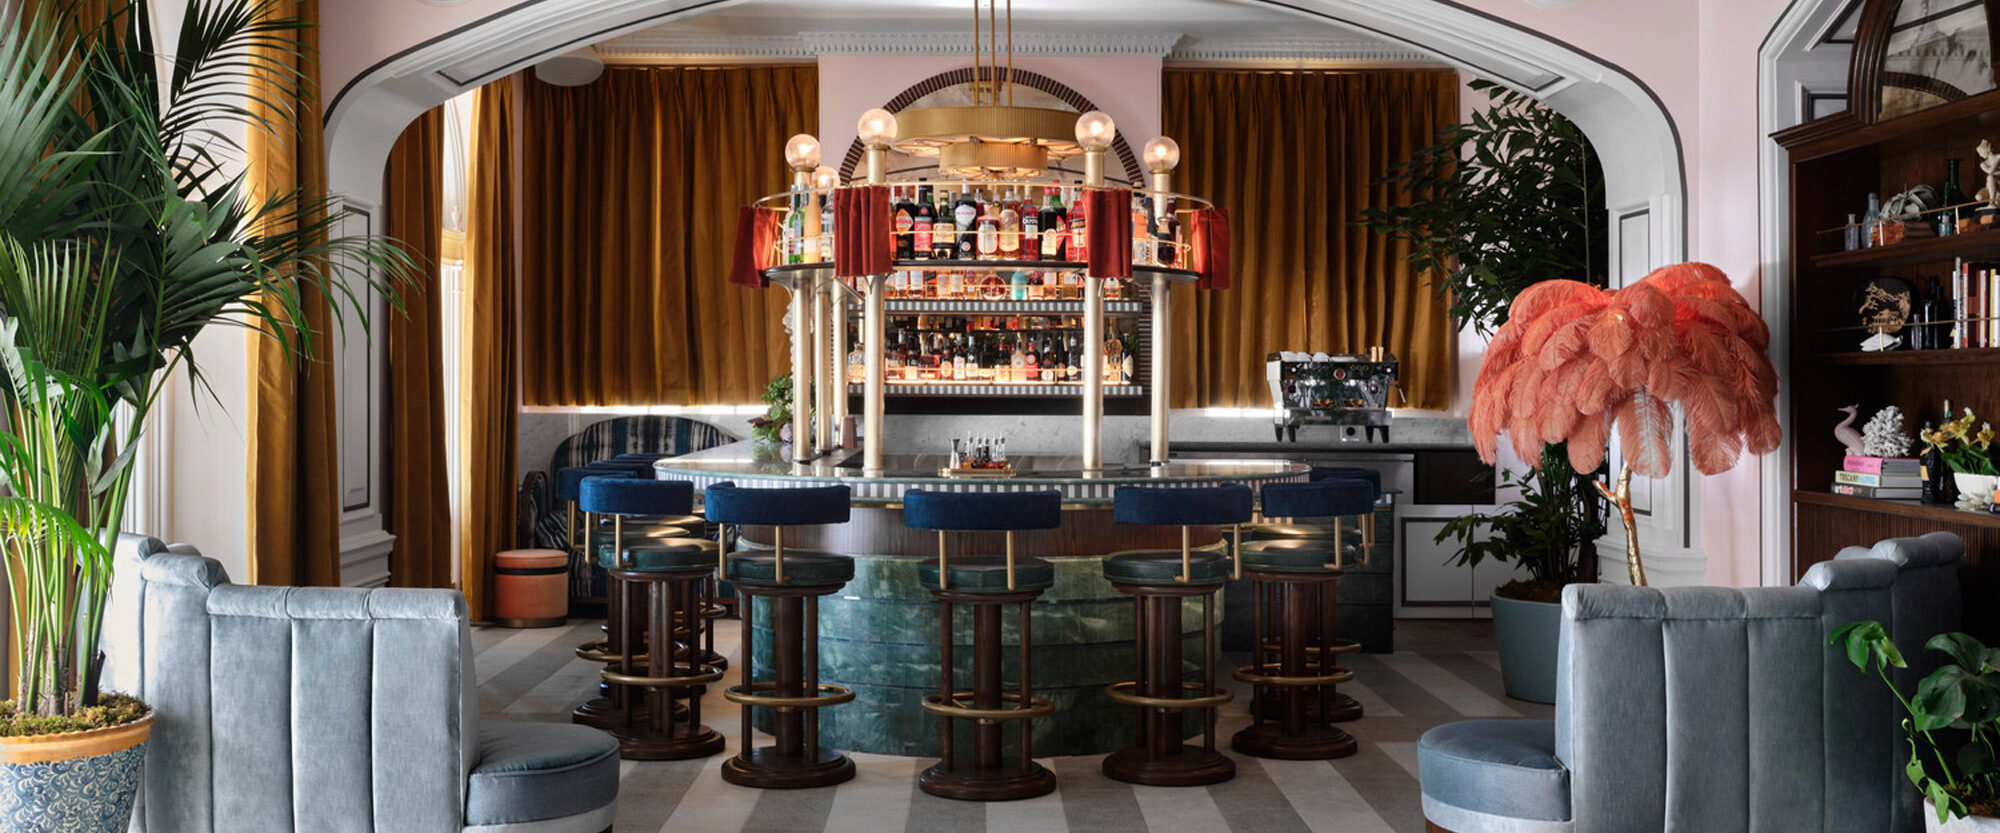 Elegant bar lounge featuring Art Deco style with a central circle bar, plush blue and grey seating, radiant floor patterns and an ornate gold chandelier providing a warm ambiance.